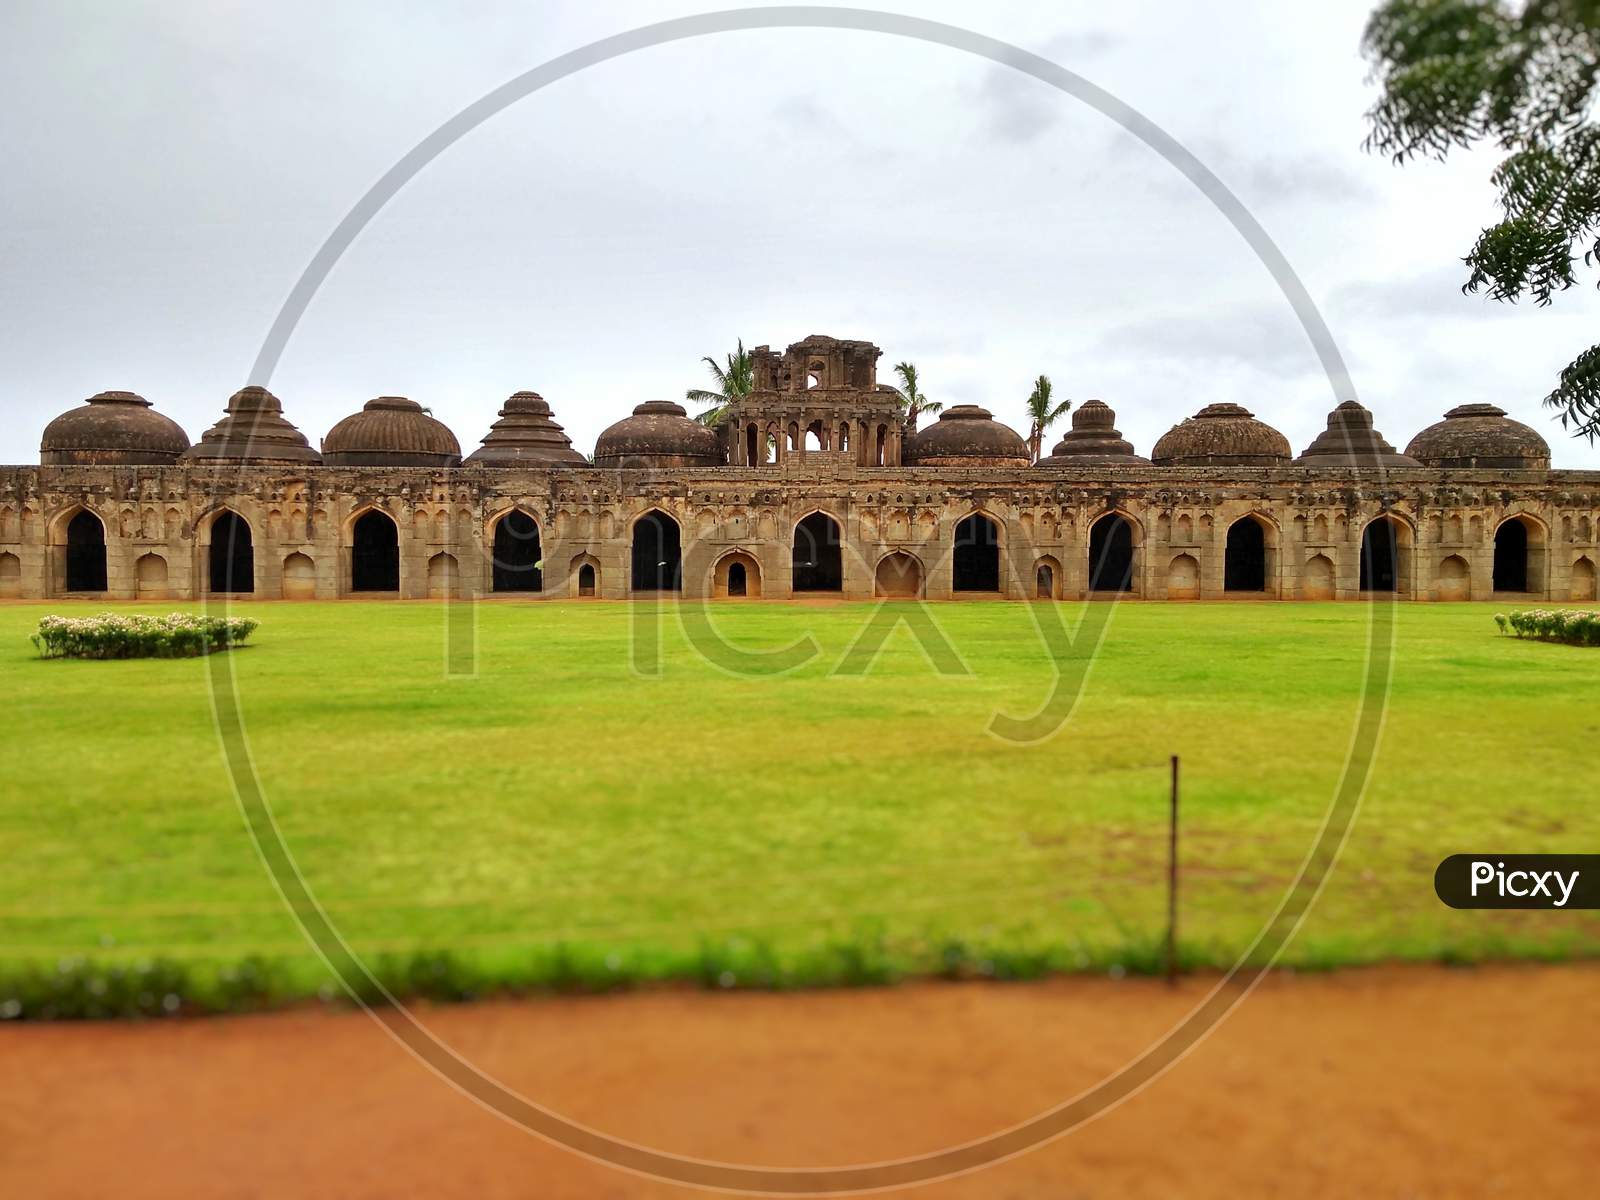 The Grandeur of the Elephant Stables at Hampi